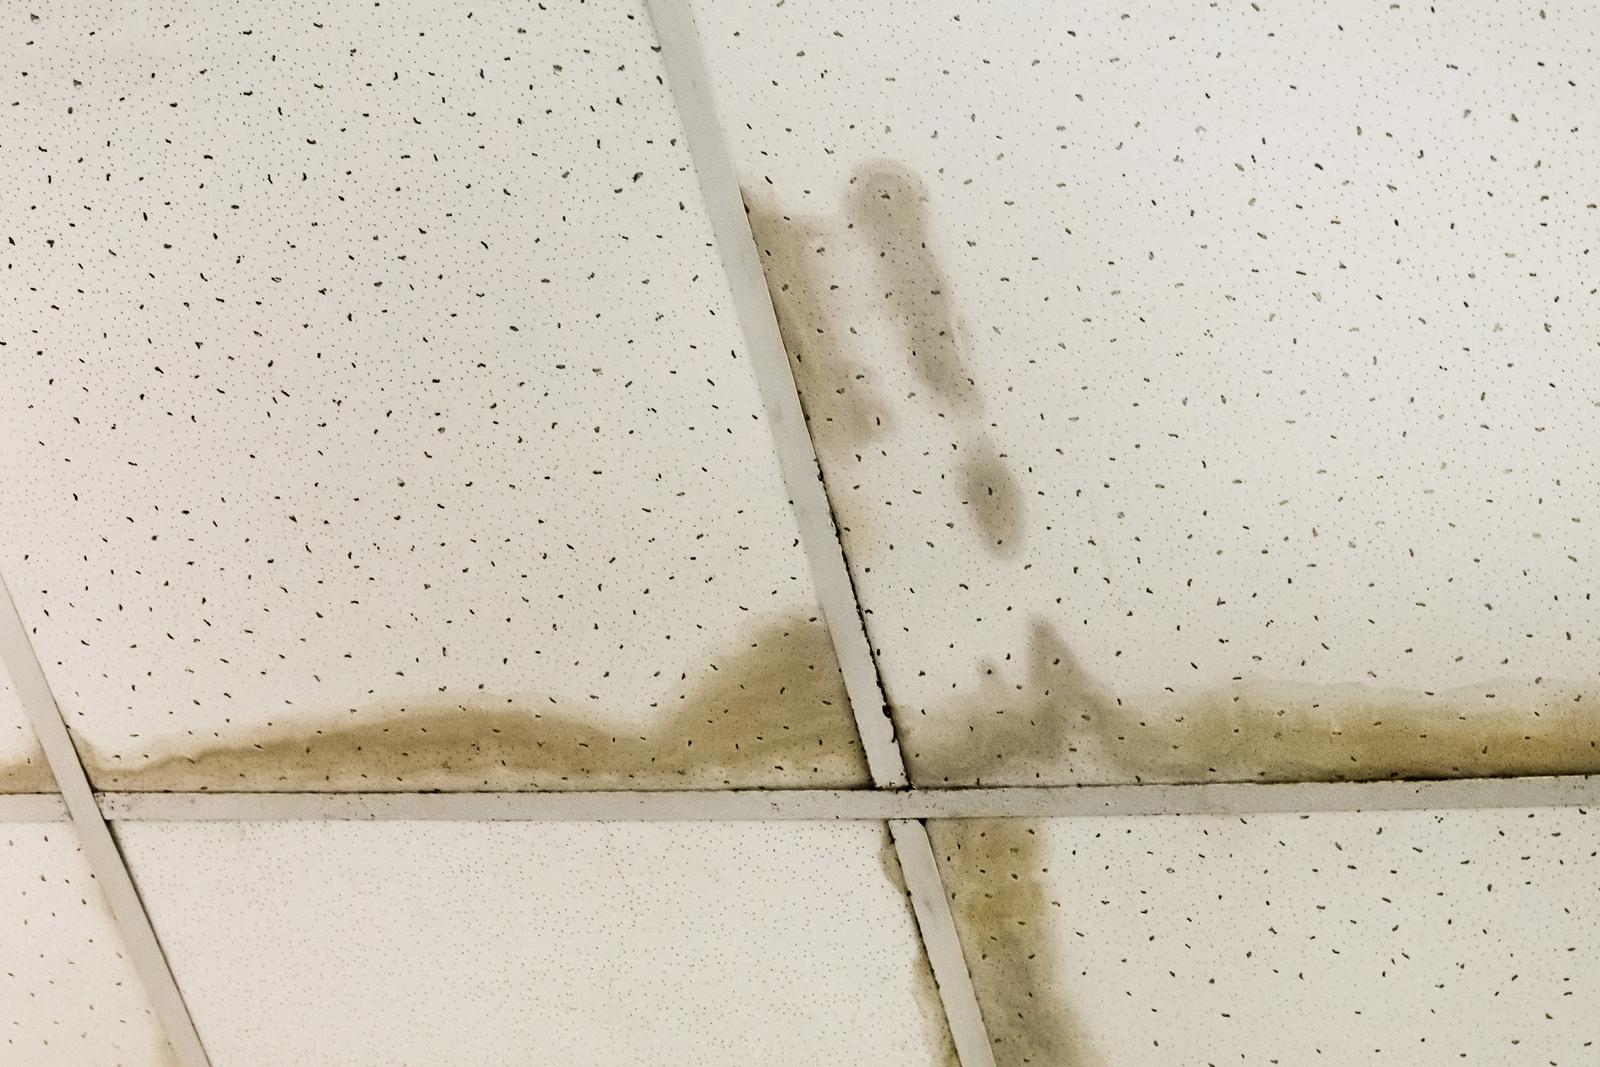 Leaking ceiling, old dirty water on the roof or flooding of neighbors, ceiling repair.